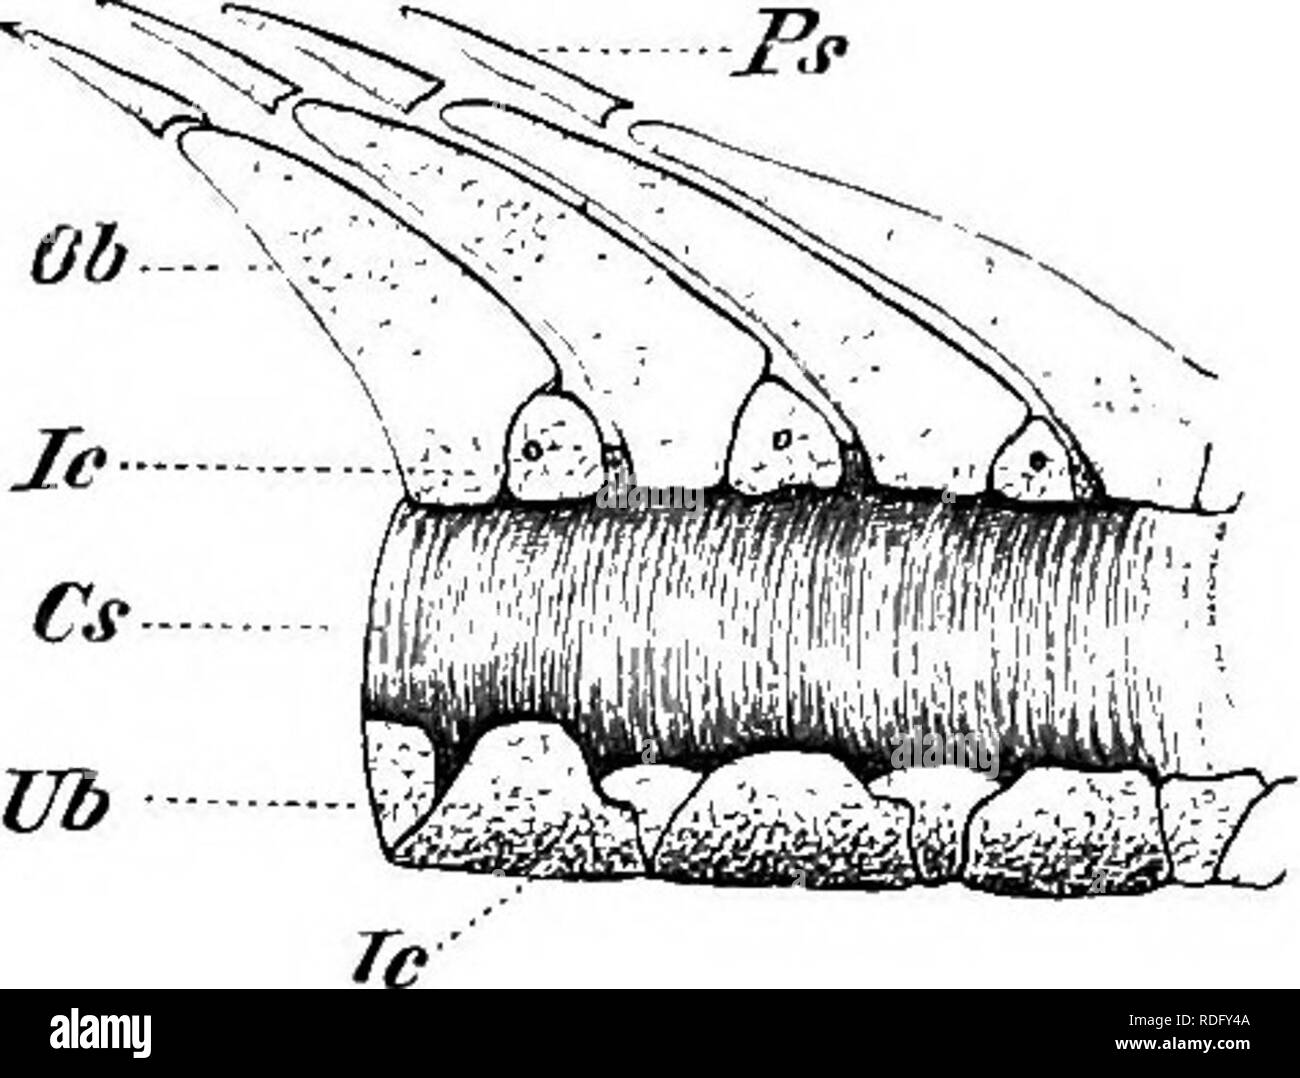 . Elements of the comparative anatomy of vertebrates. Anatomy, Comparative. VERTEBRAL COLUMX 37 mentary neural (dorsal) arches, which, liowever, do not meet above the spinal cord. These cartilages, of which there are two pairs to each muscular segment or myotome, correspond to the &quot; intercalary pieces&quot; of Elasmobranchs (p. 38); they serve in the first instance for the origin and insertion of the muscles, and at the same time form a protection for the spinal cord. Neural spines also occur in the middle of the axis, and in the caudal region hcernal (ventral) arches enclosing the caudal Stock Photo